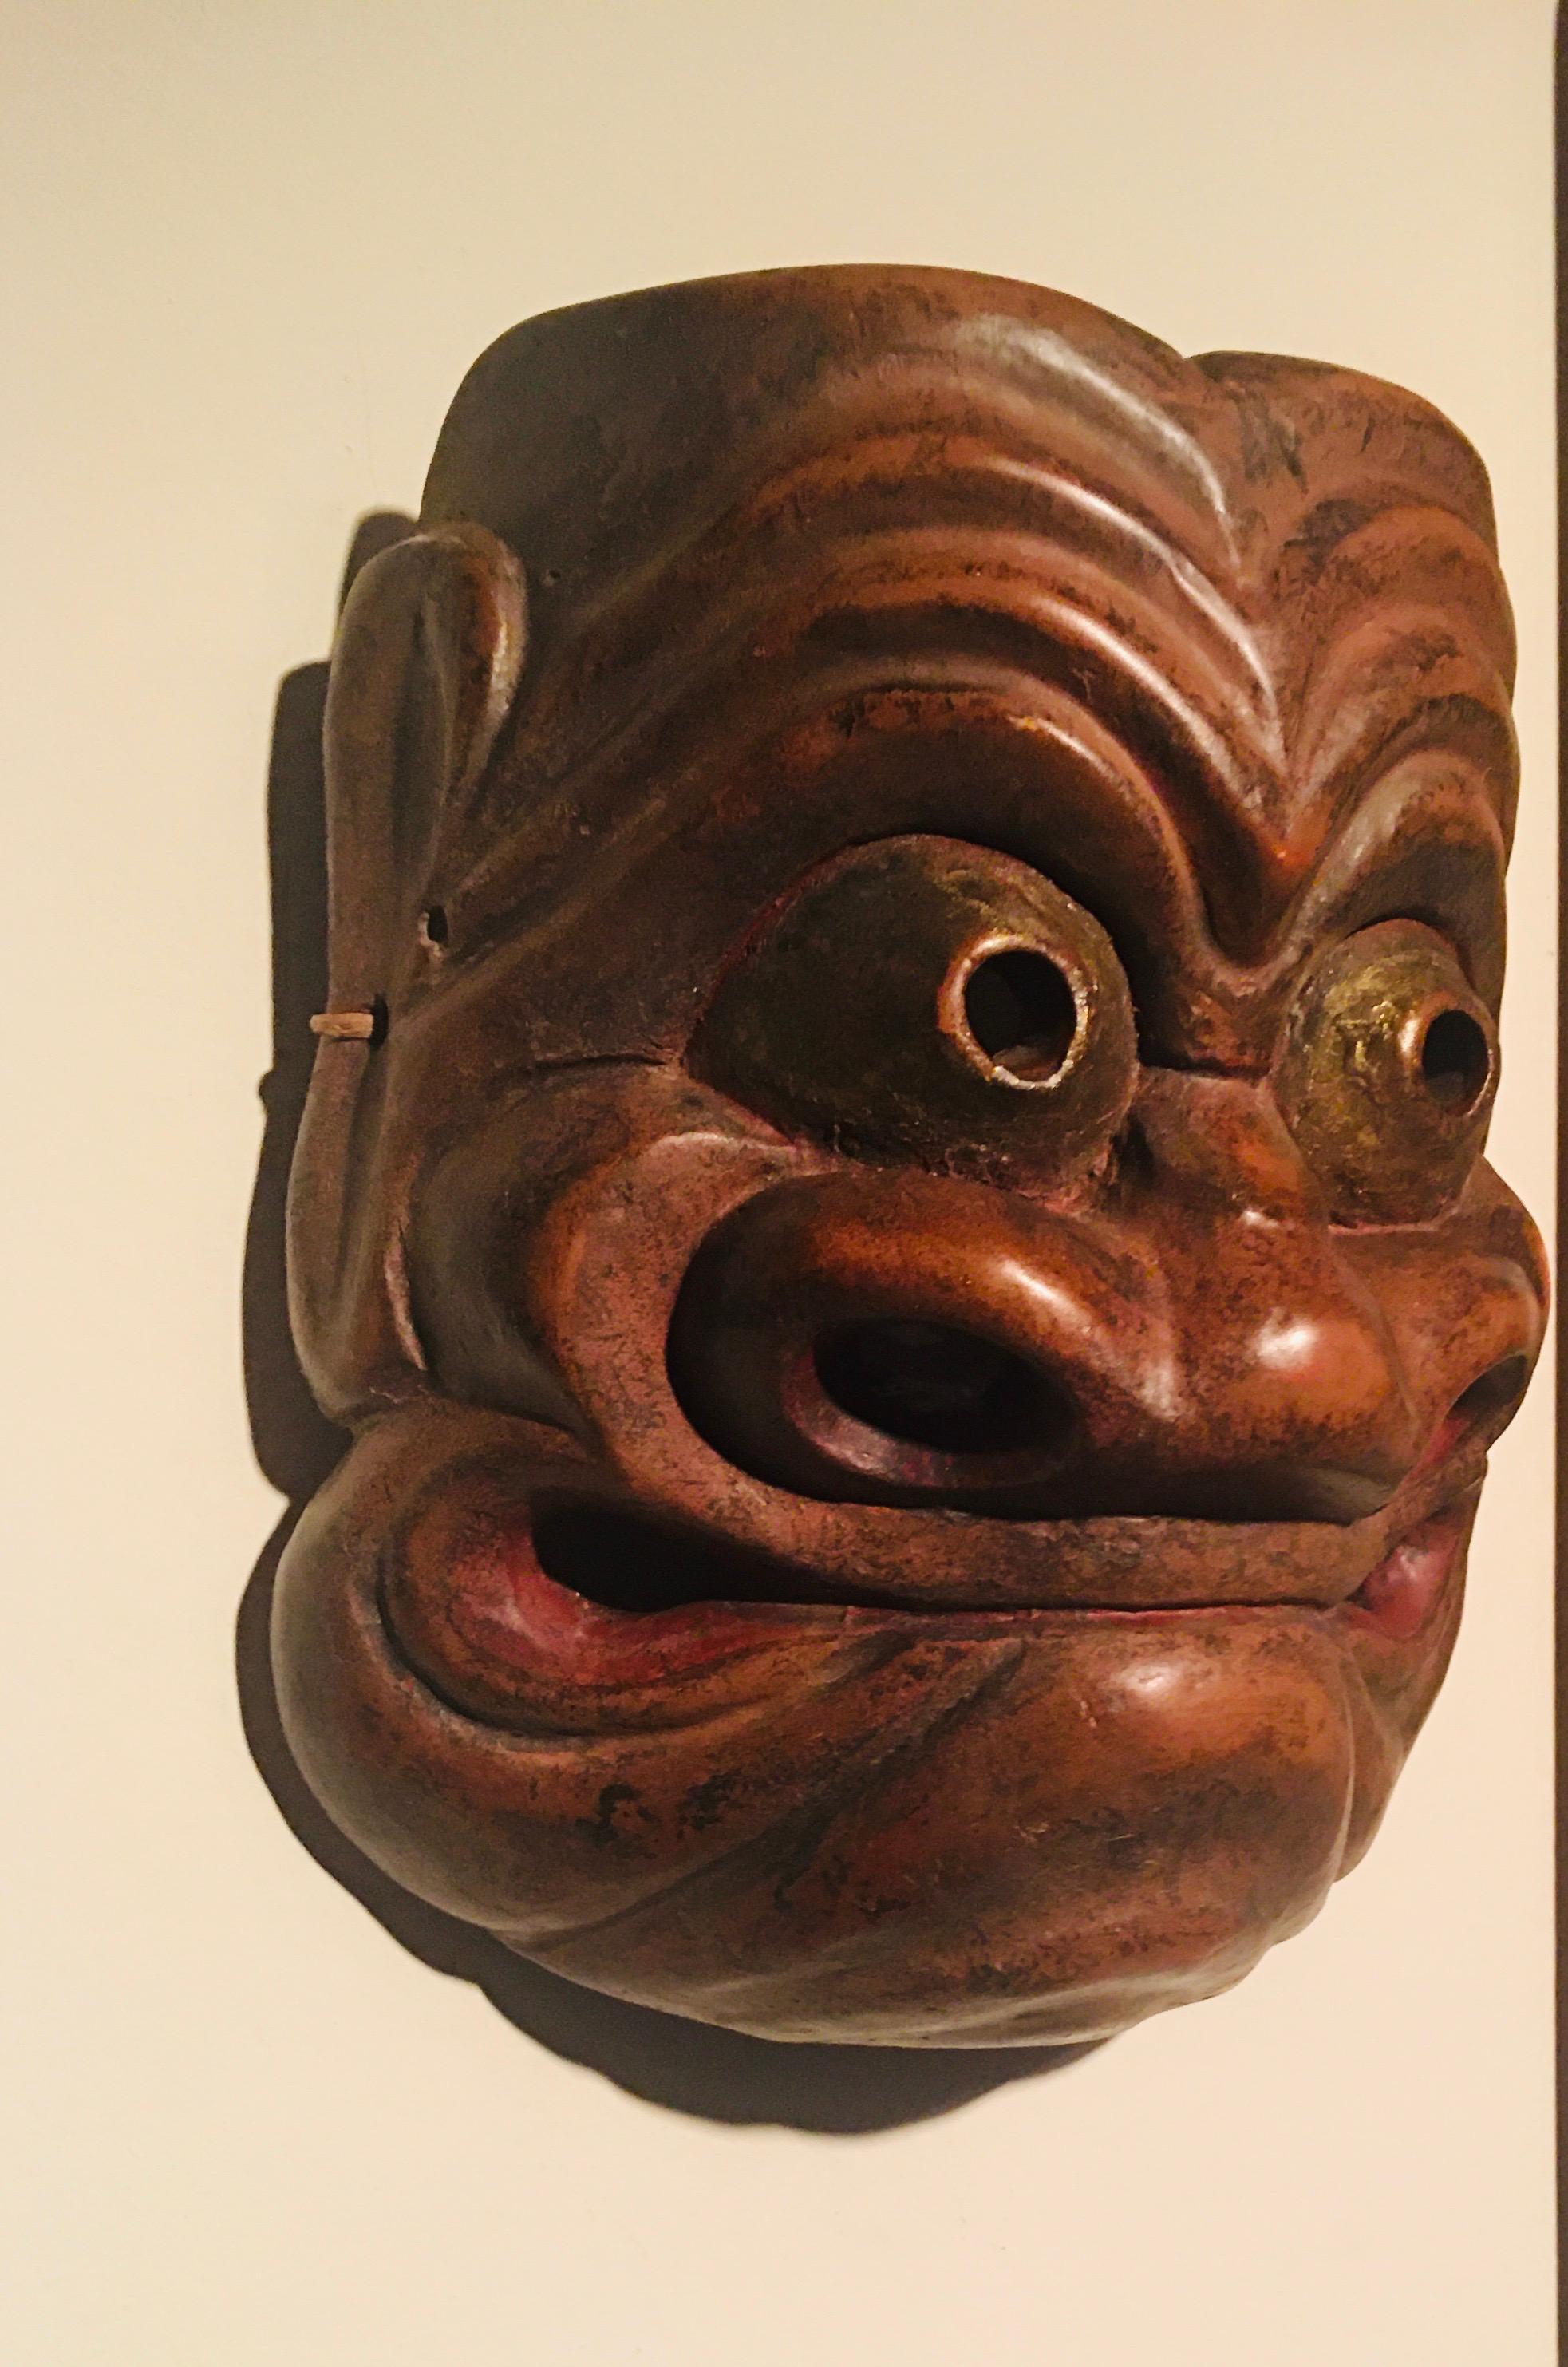 Japanese Edo period carved, lacquered and gilt cypress wood Noh mask of Obeshimi. Made in the circa late 17th century, this extremely rare piece represents the oldest form of beshimi masks, characteristically where the mouth is firmly clenched and